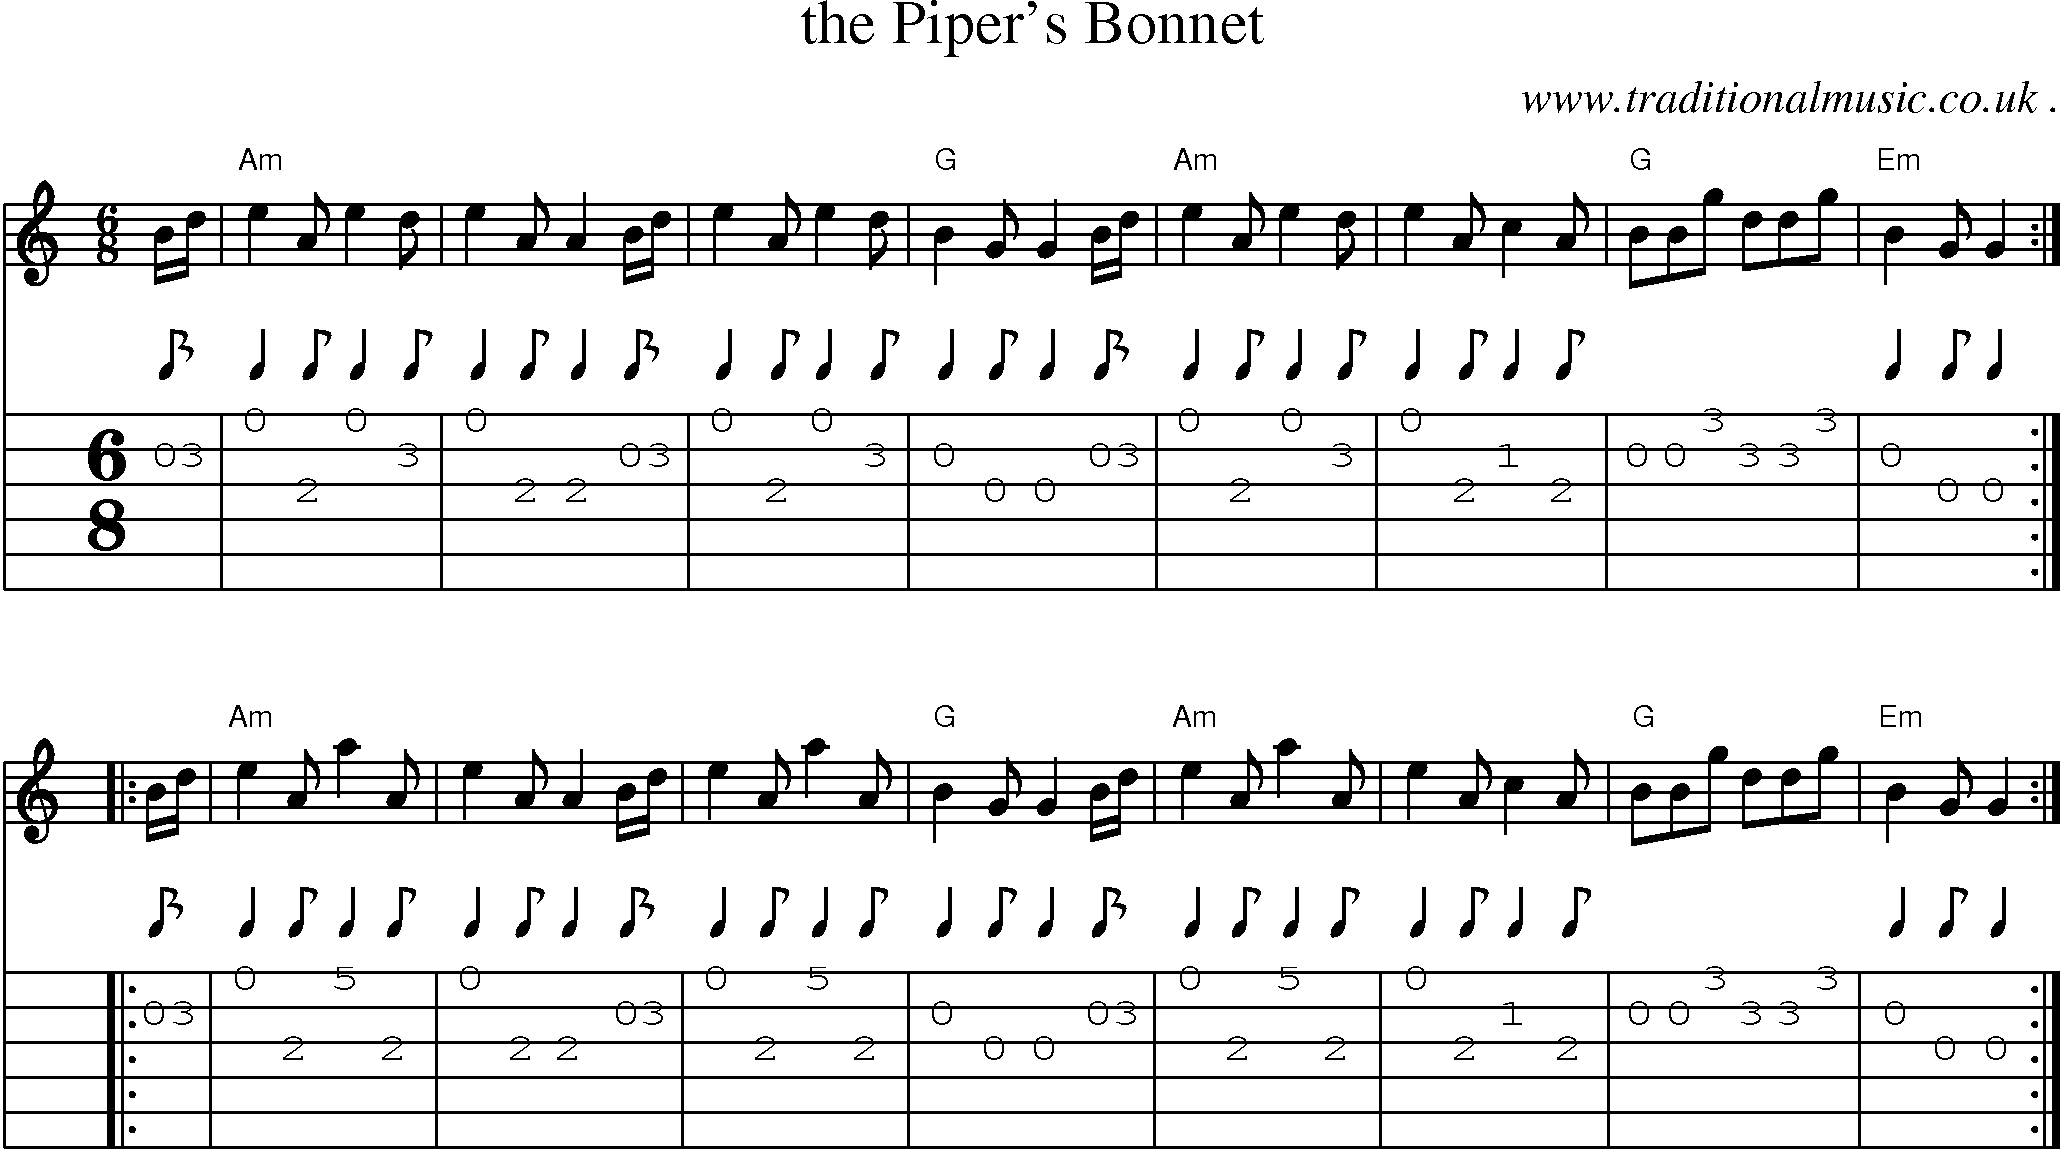 Sheet-music  score, Chords and Guitar Tabs for The Pipers Bonnet